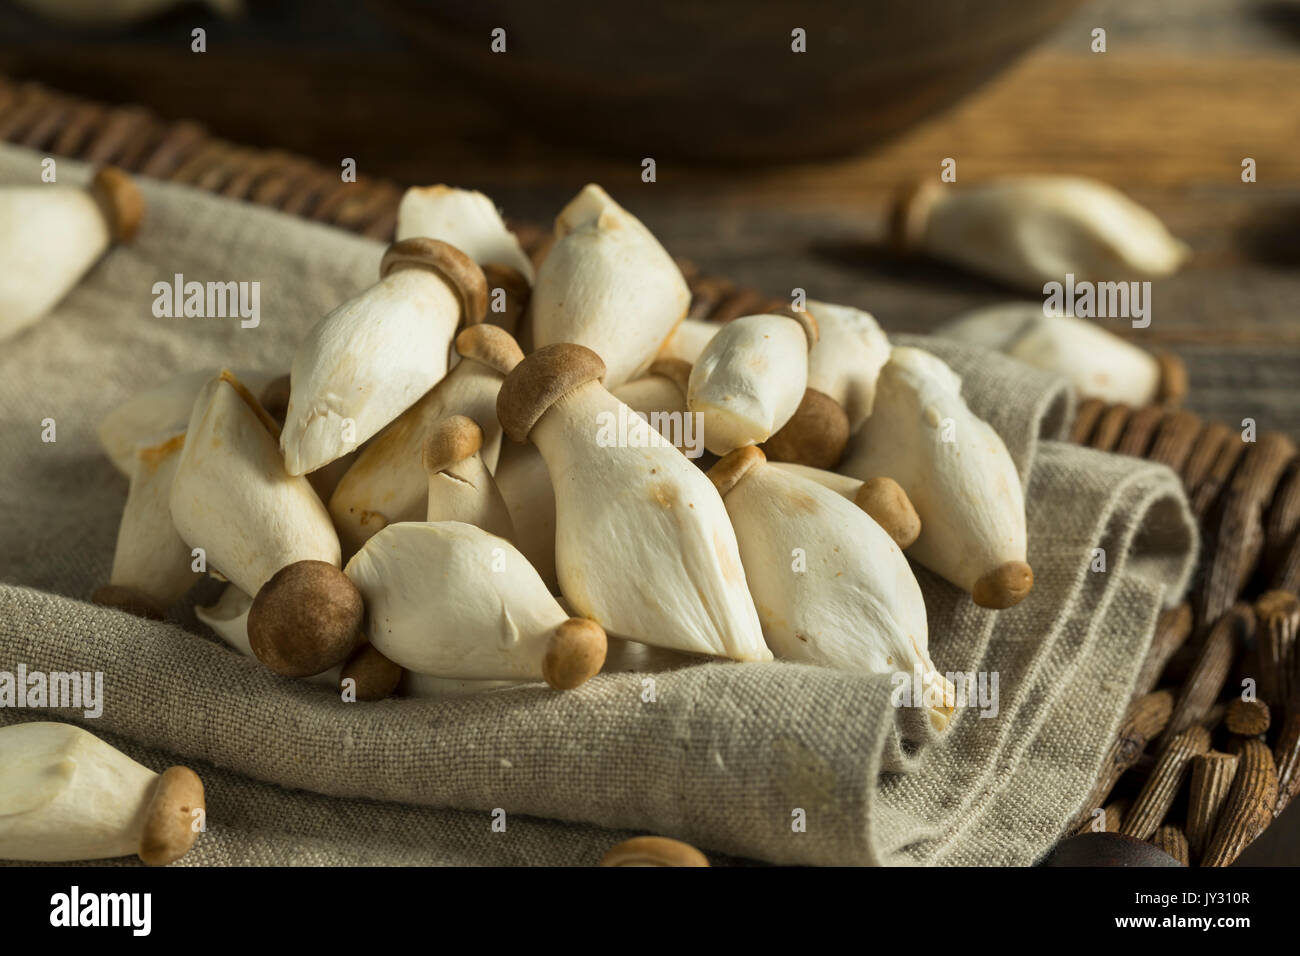 Raw Organic Baby King Oyster Mushrooms Ready to Eat Stock Photo